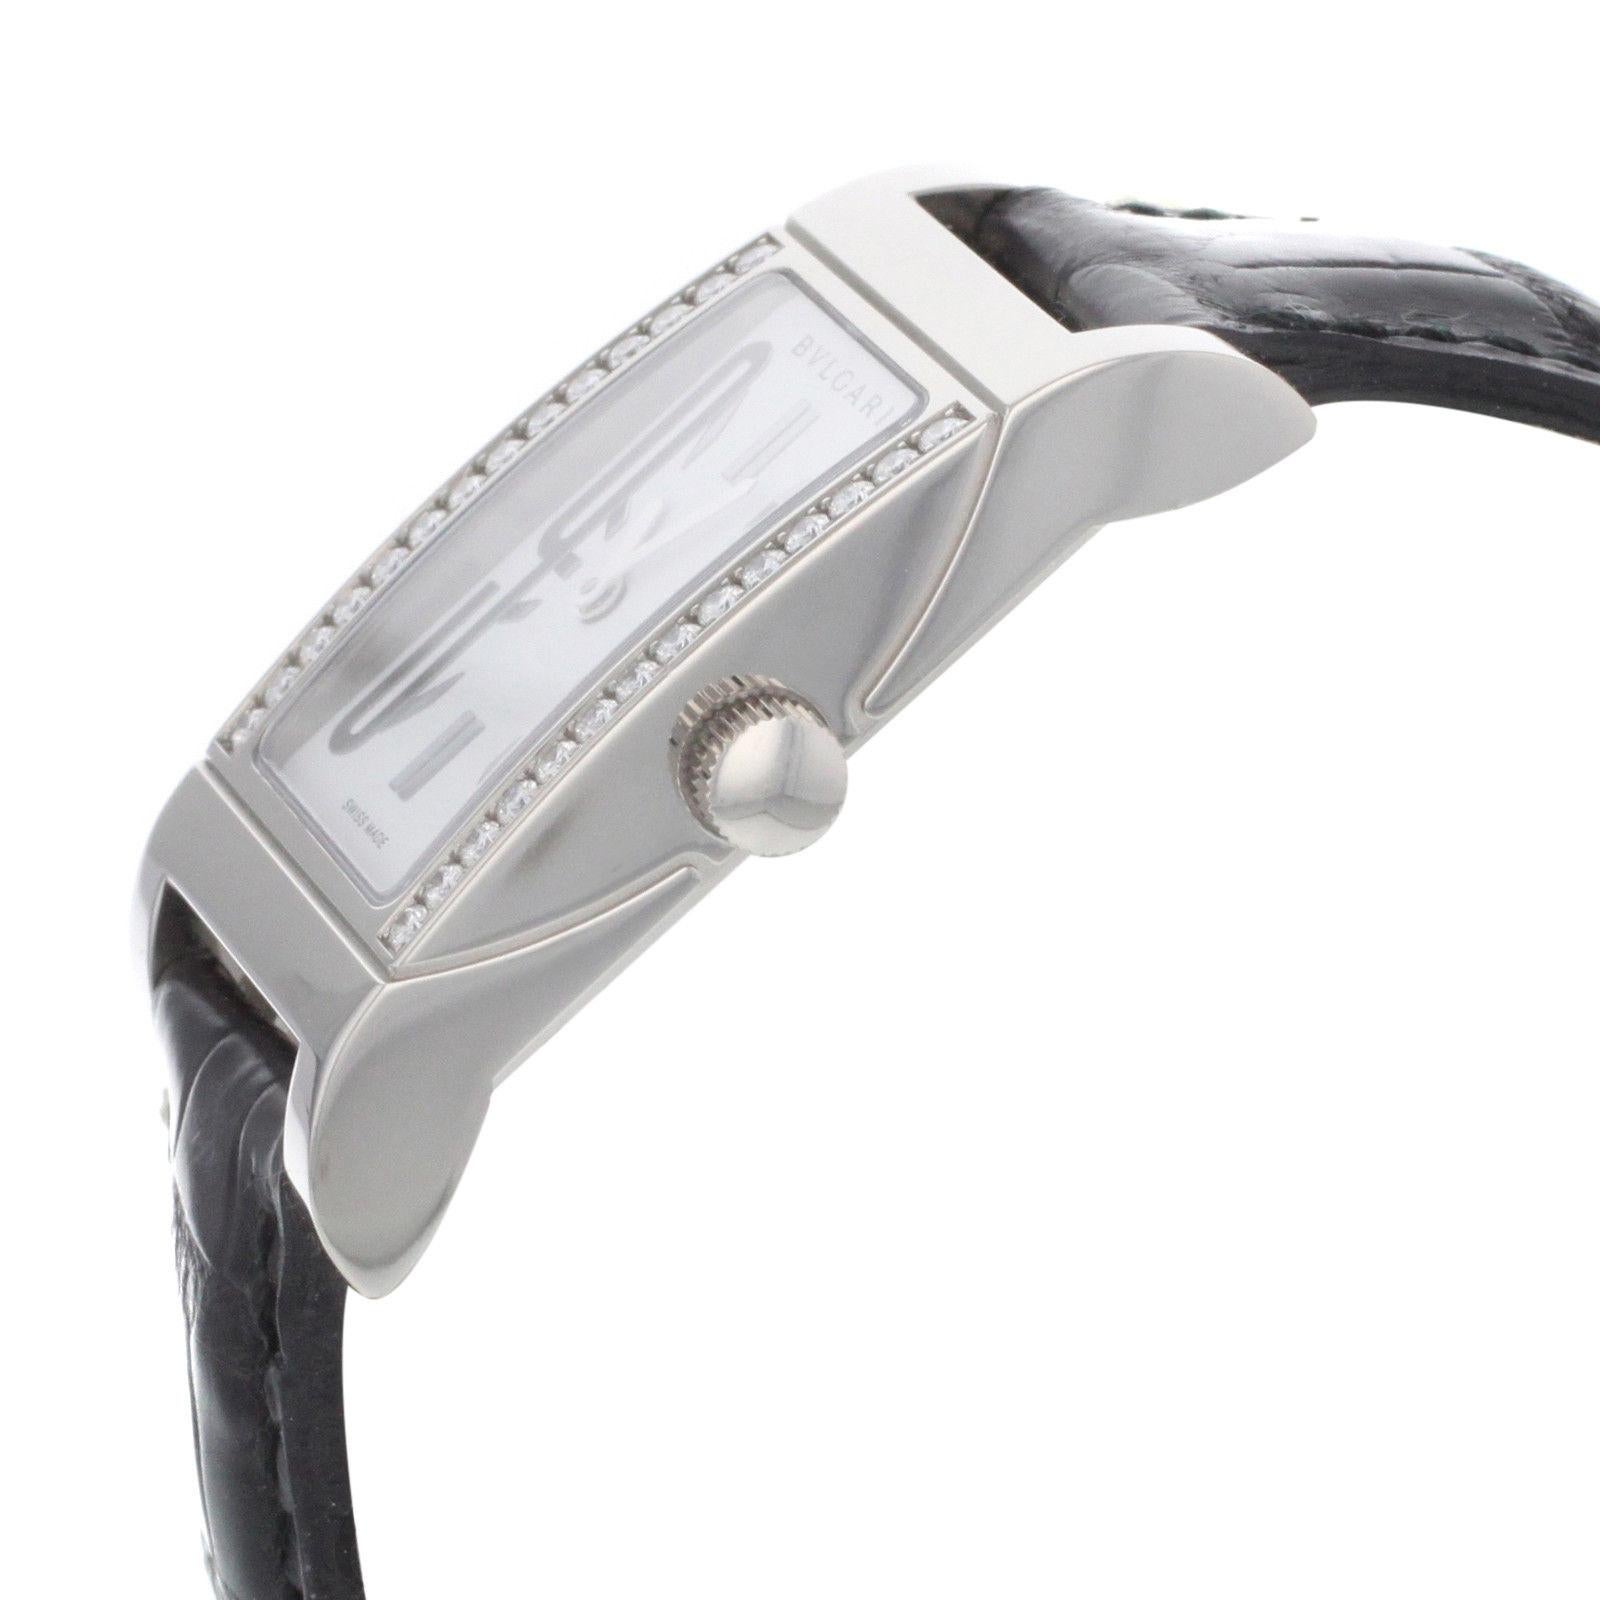 (7034)
This display model Bvlgari Rettangolo RT W39 G is a beautiful Womens timepiece that is powered by a quartz movement which is cased in a s White Gold case. It has a rectangle shape face, diamonds dial and has hand sticks & numerals style